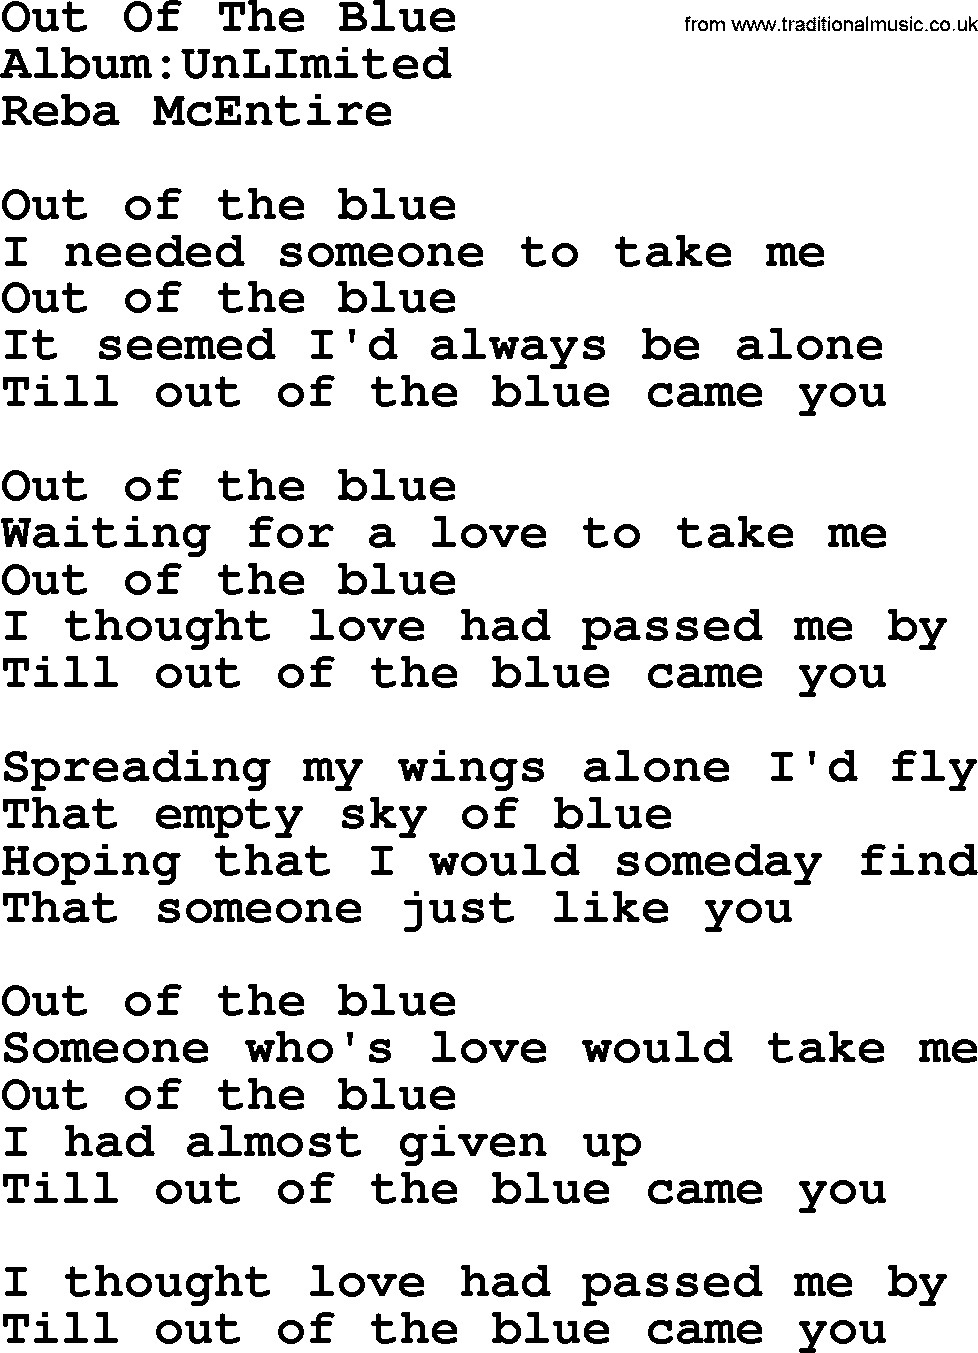 Reba McEntire song: Out Of The Blue lyrics